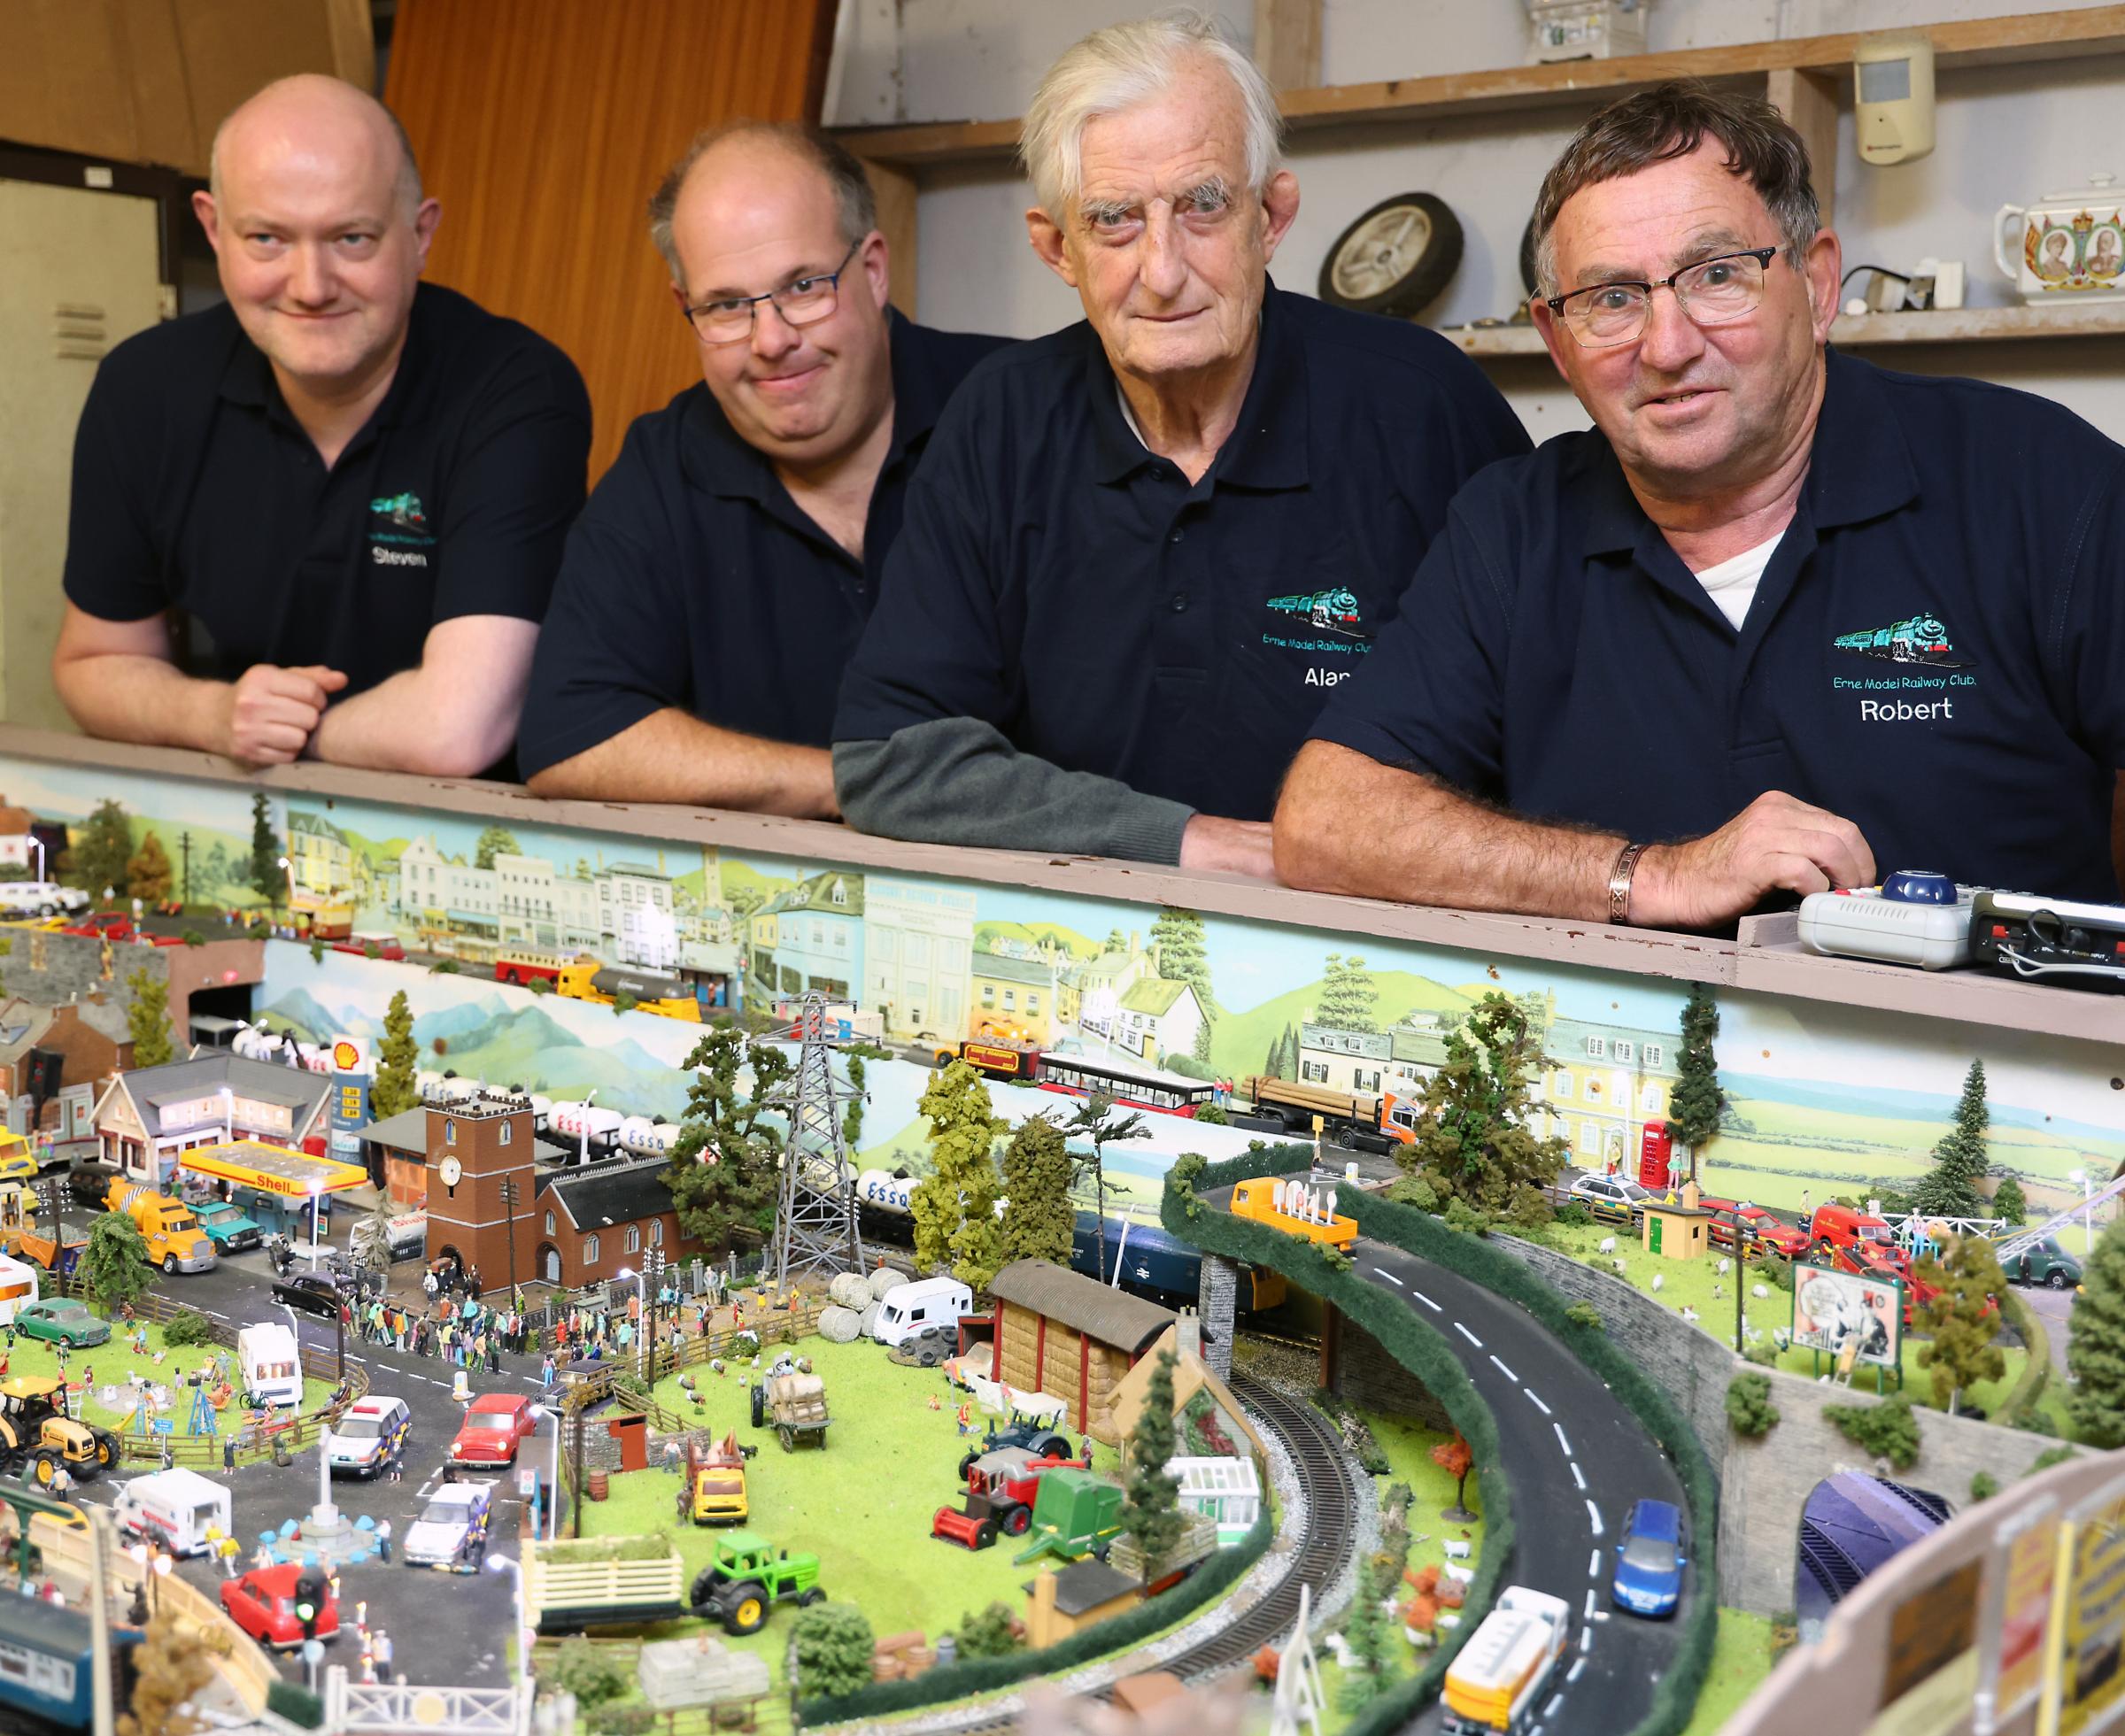 Members of The Erne Model Railway are from left, Steven Haskins, Cyril Liddle, Alan Cooper and Robert Coalter, Chairman.